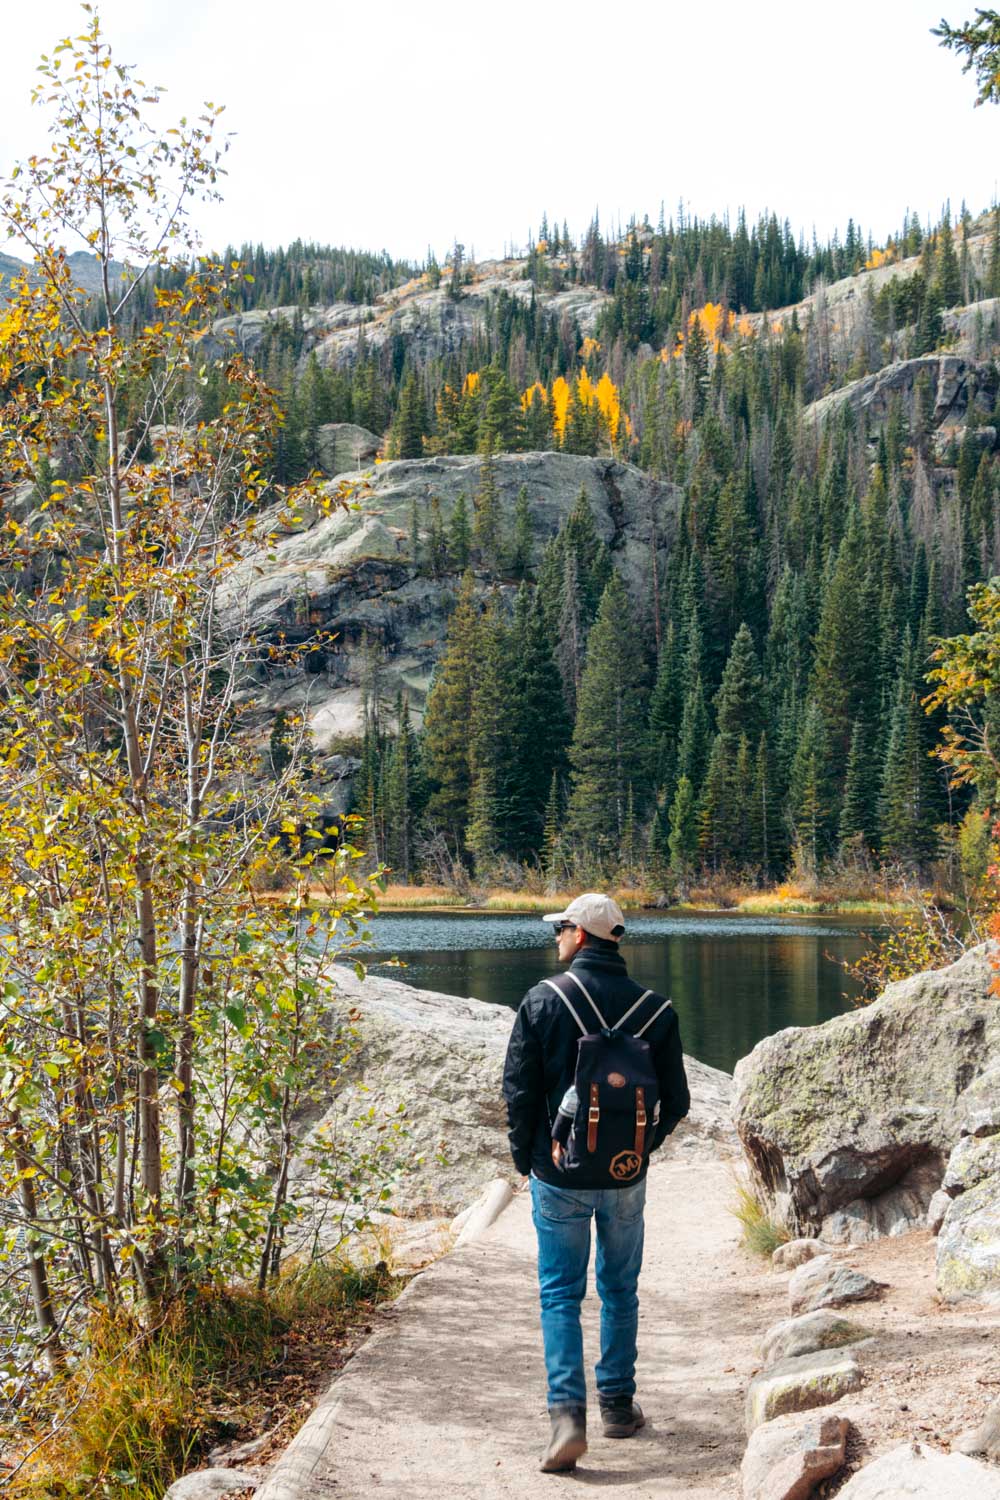 Hiking in Rocky Mountain National Park - Roads and Destinations